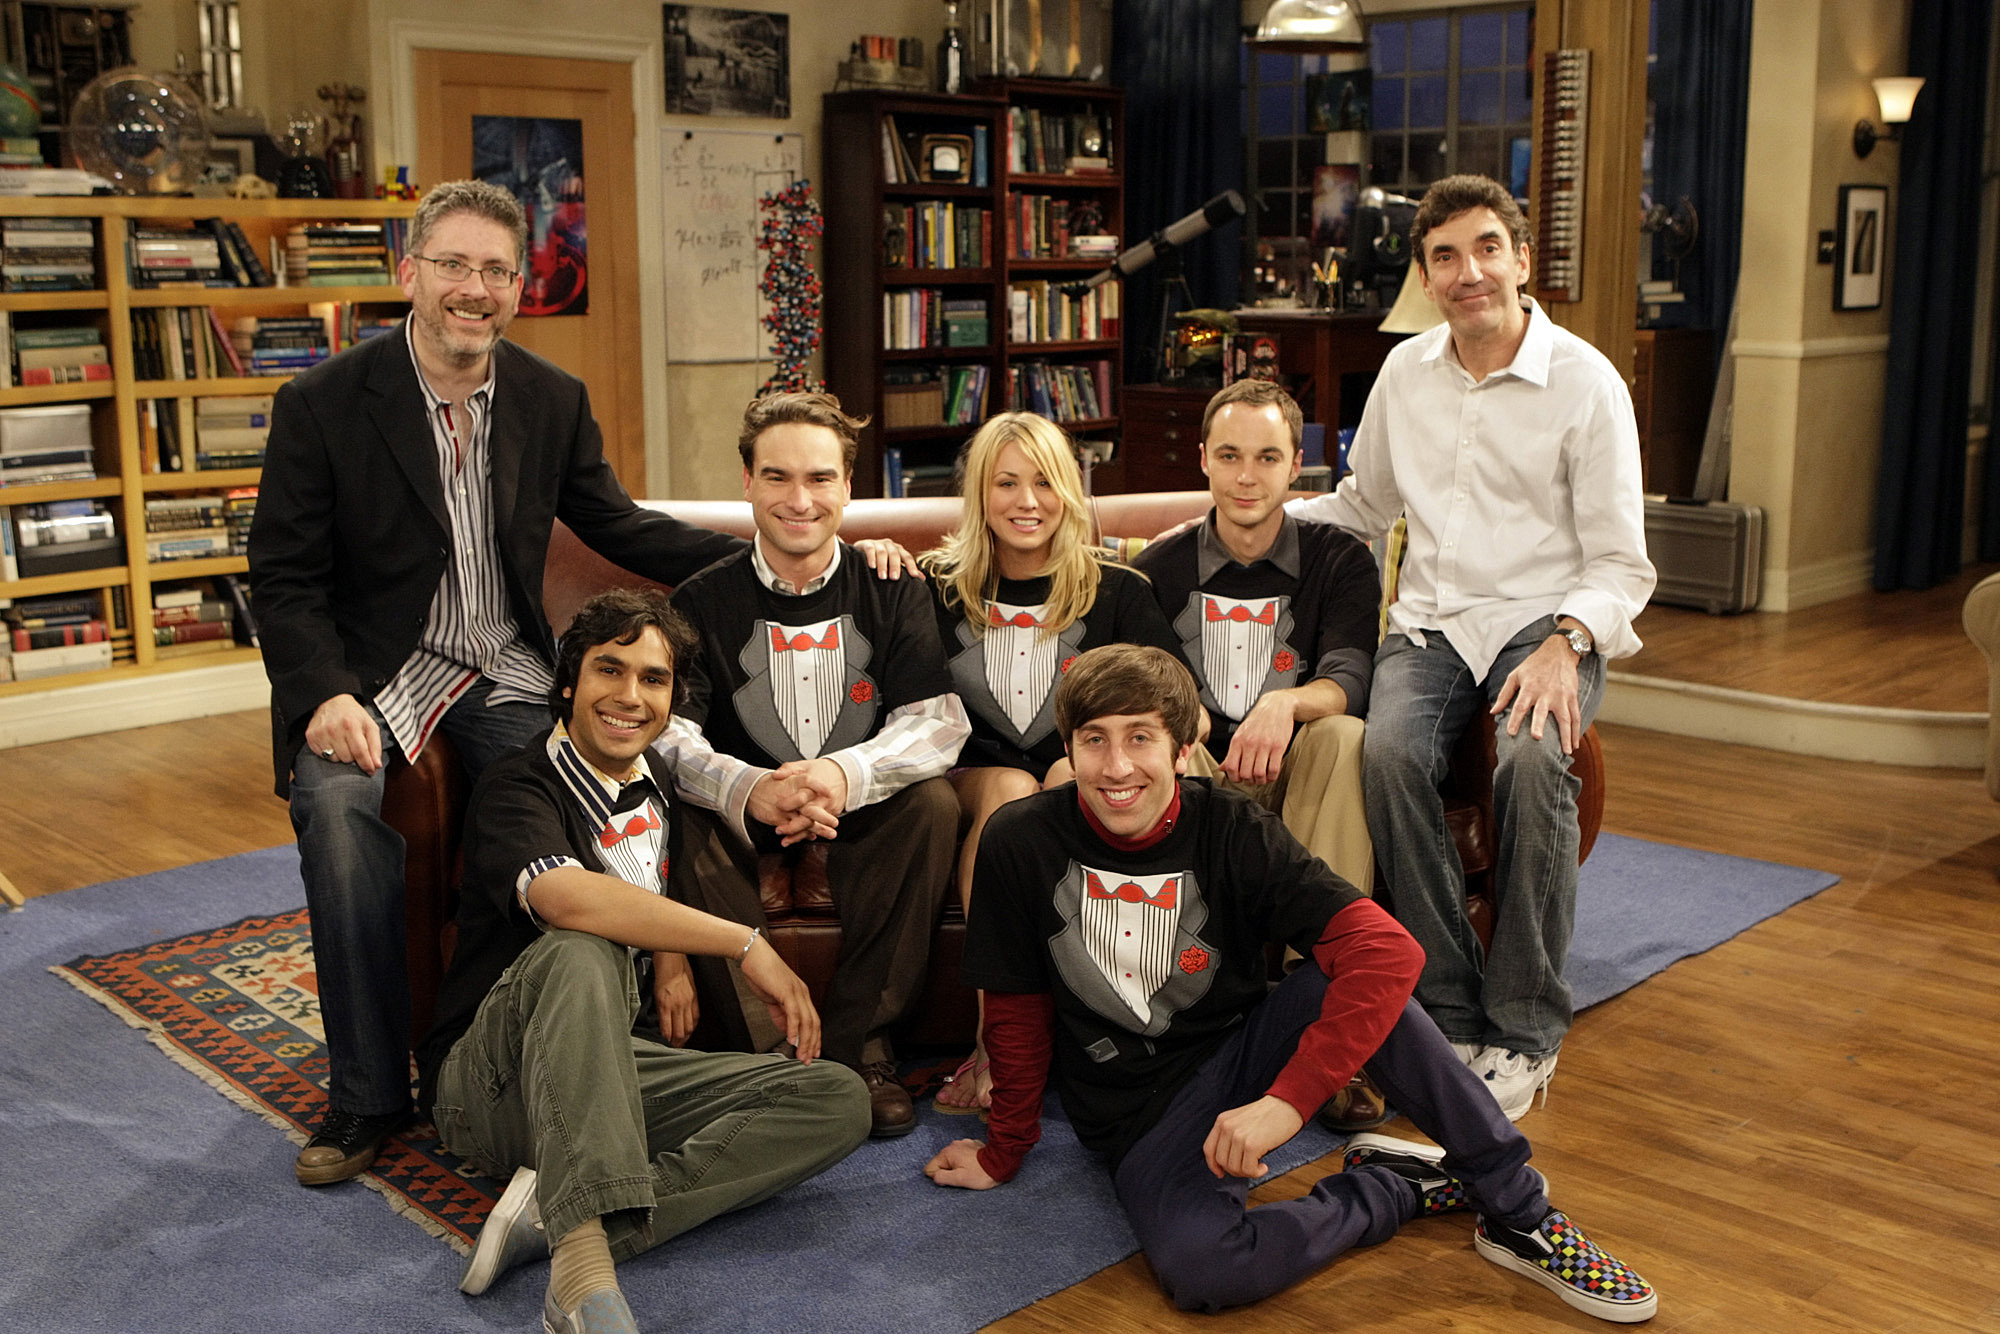 The cast of 'The Big Bang Theory' with Chuck Lorre and Bill Prady